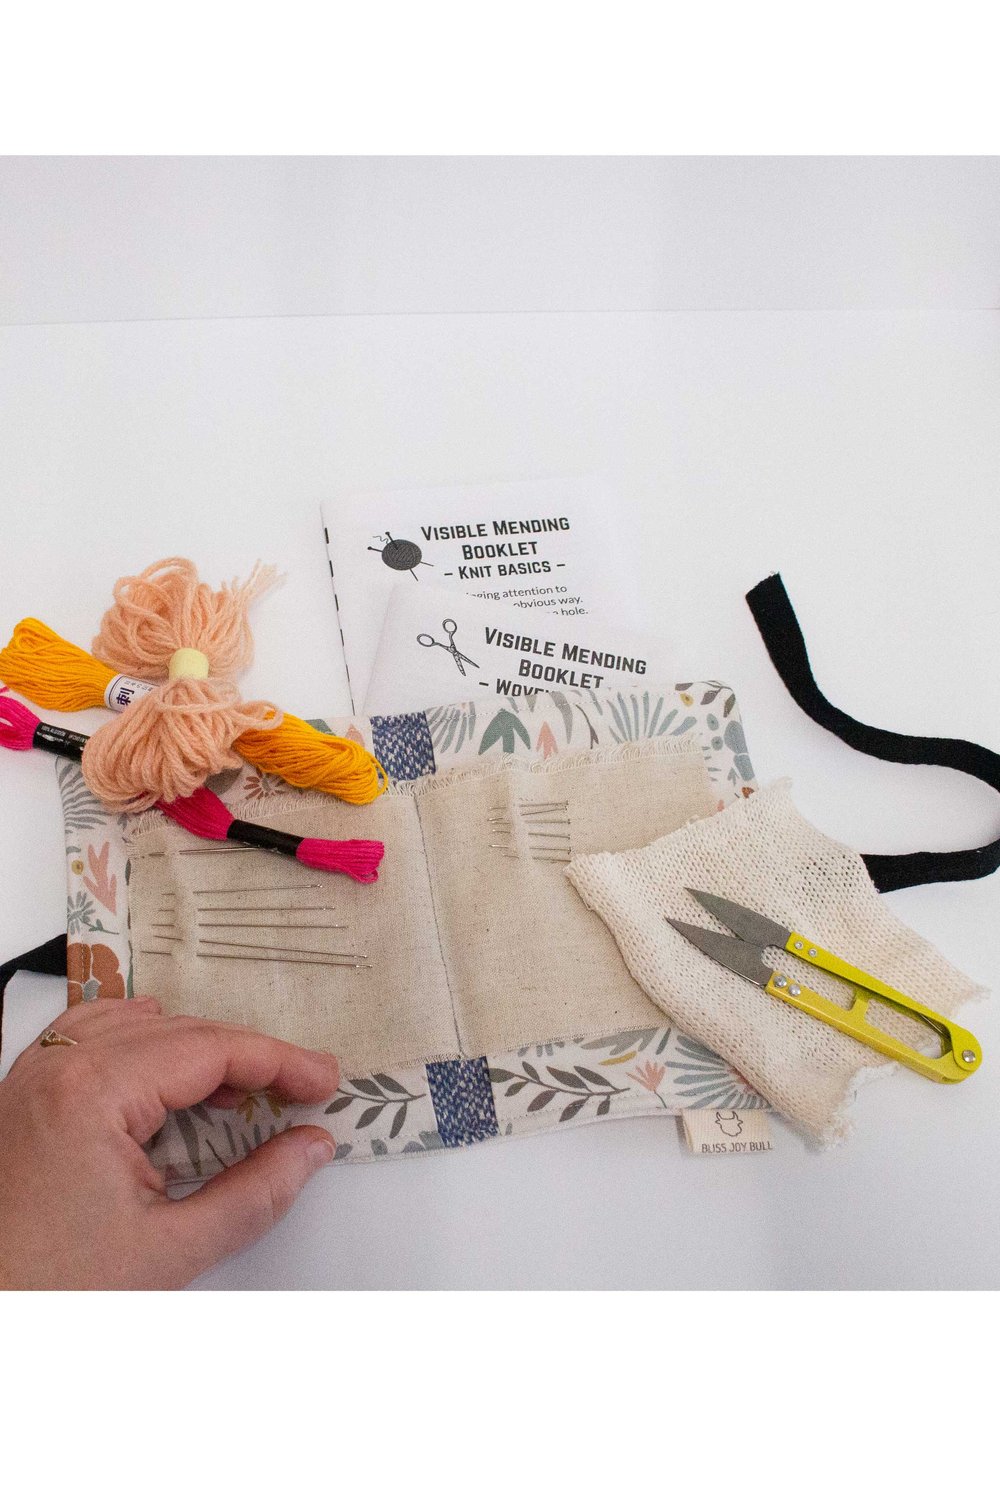 Traveling Mending Kit by BLISS JOY BULL — Nowhere Collective